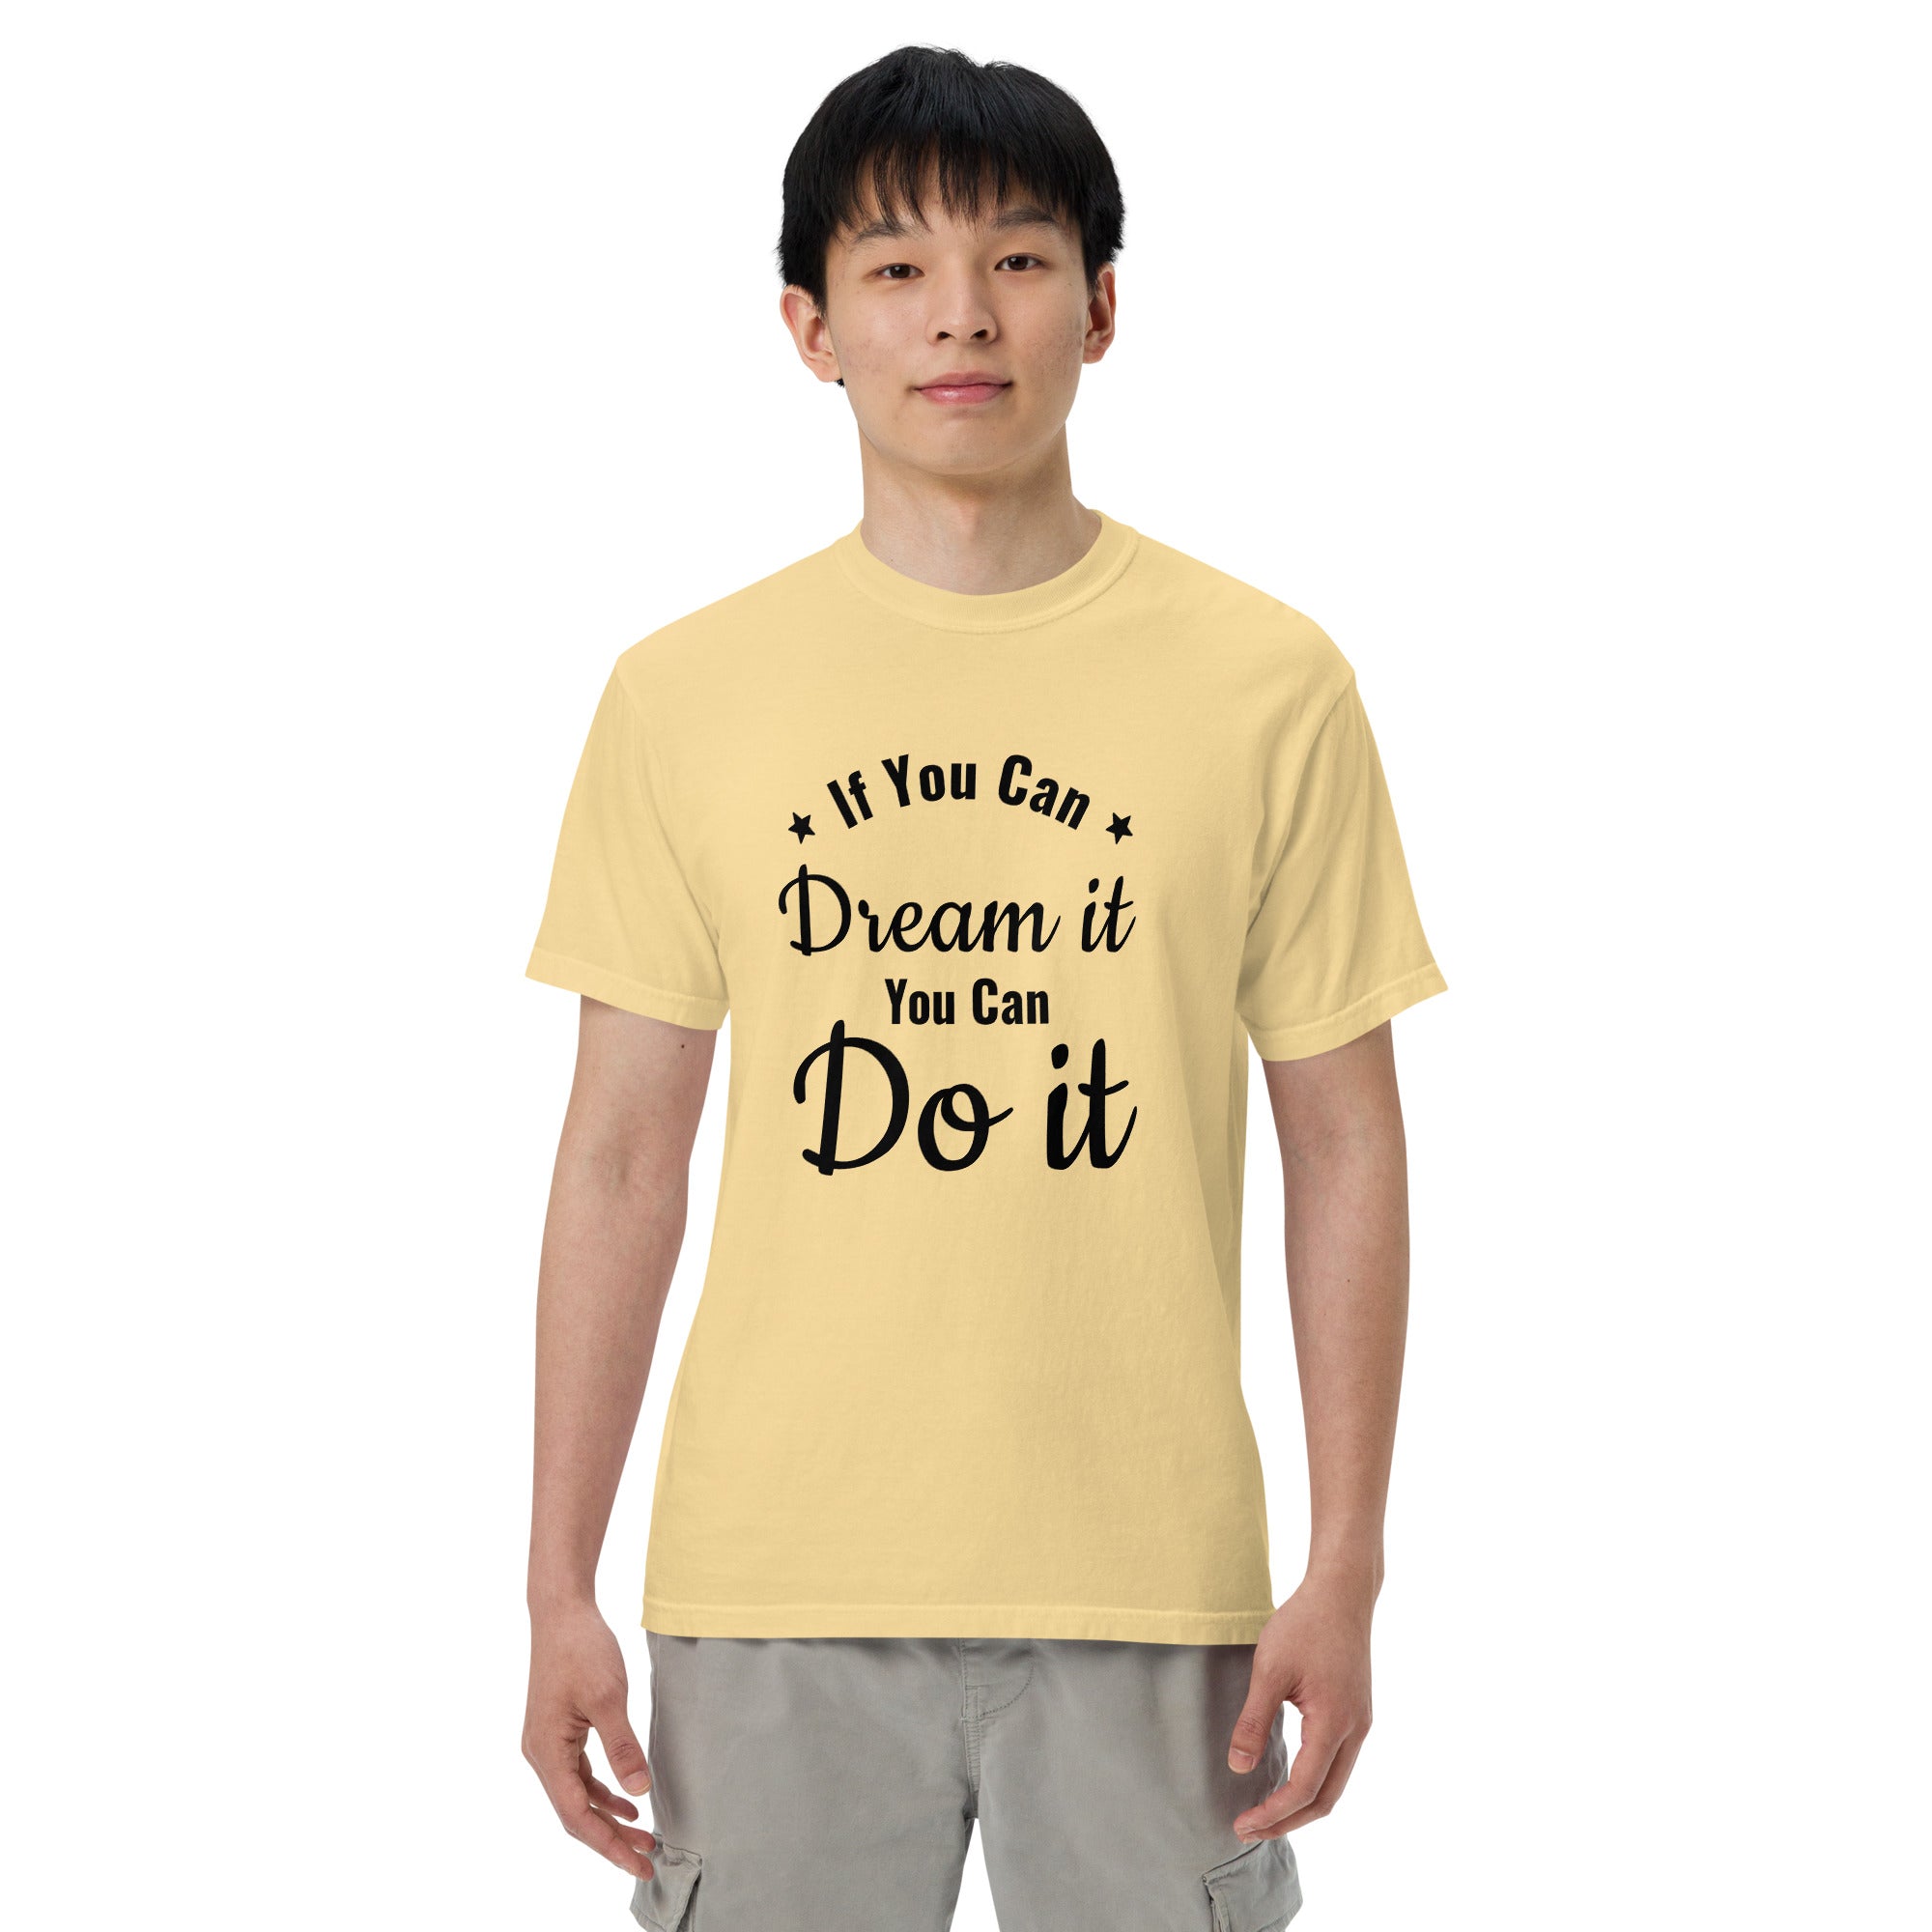 If You Can Dream it, You Can Do it t-shirt